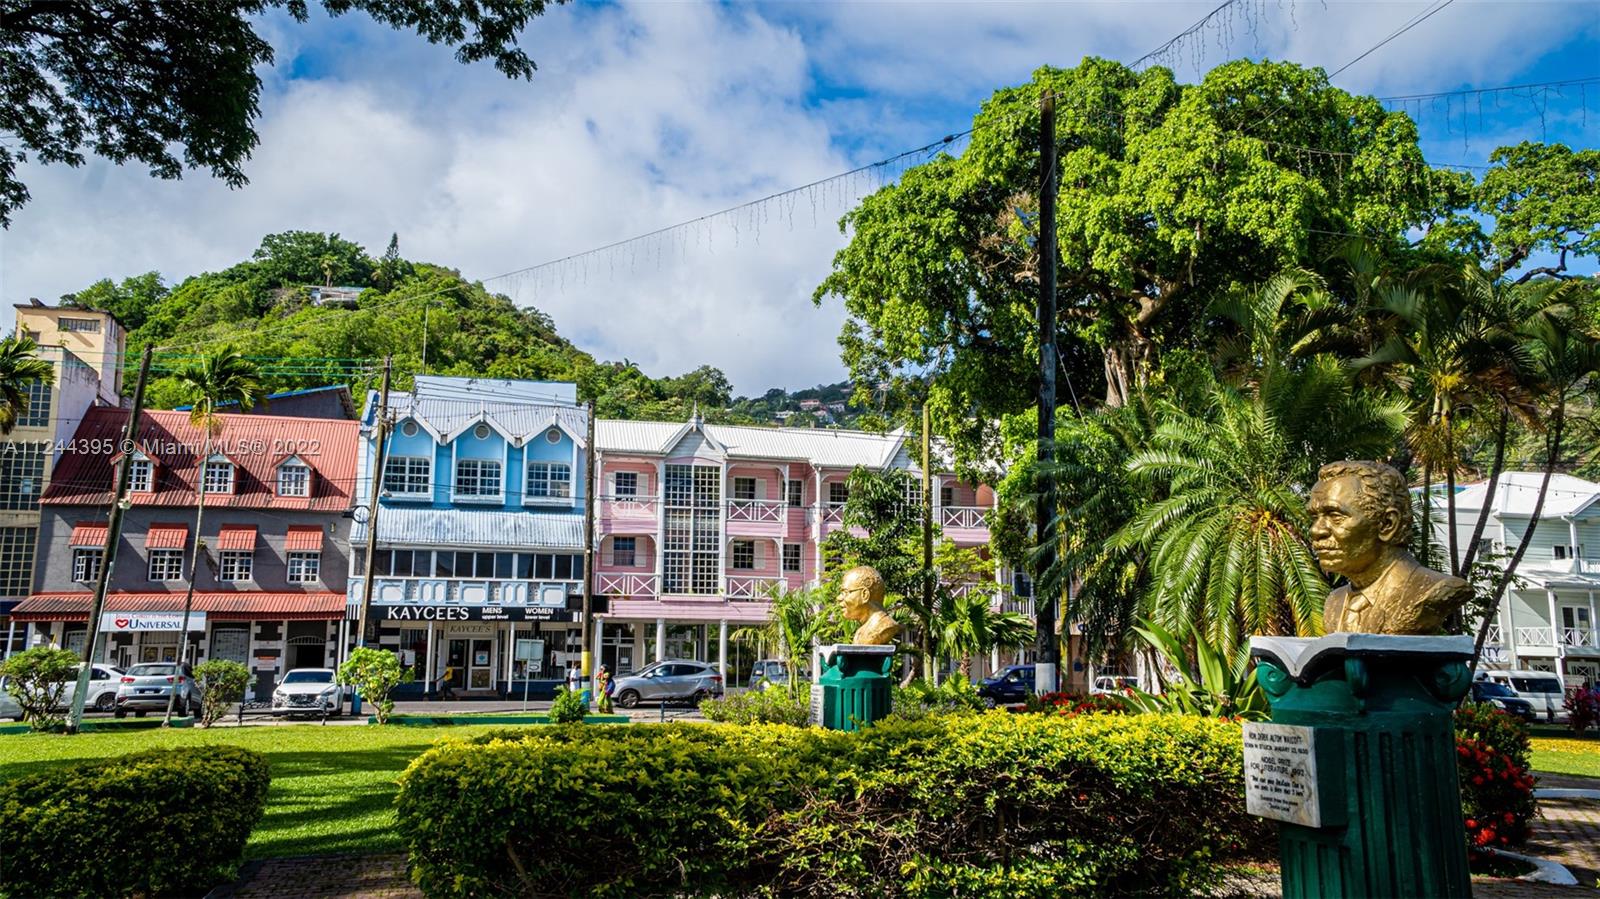  St. Lucia features charming architecture with English and French influences.